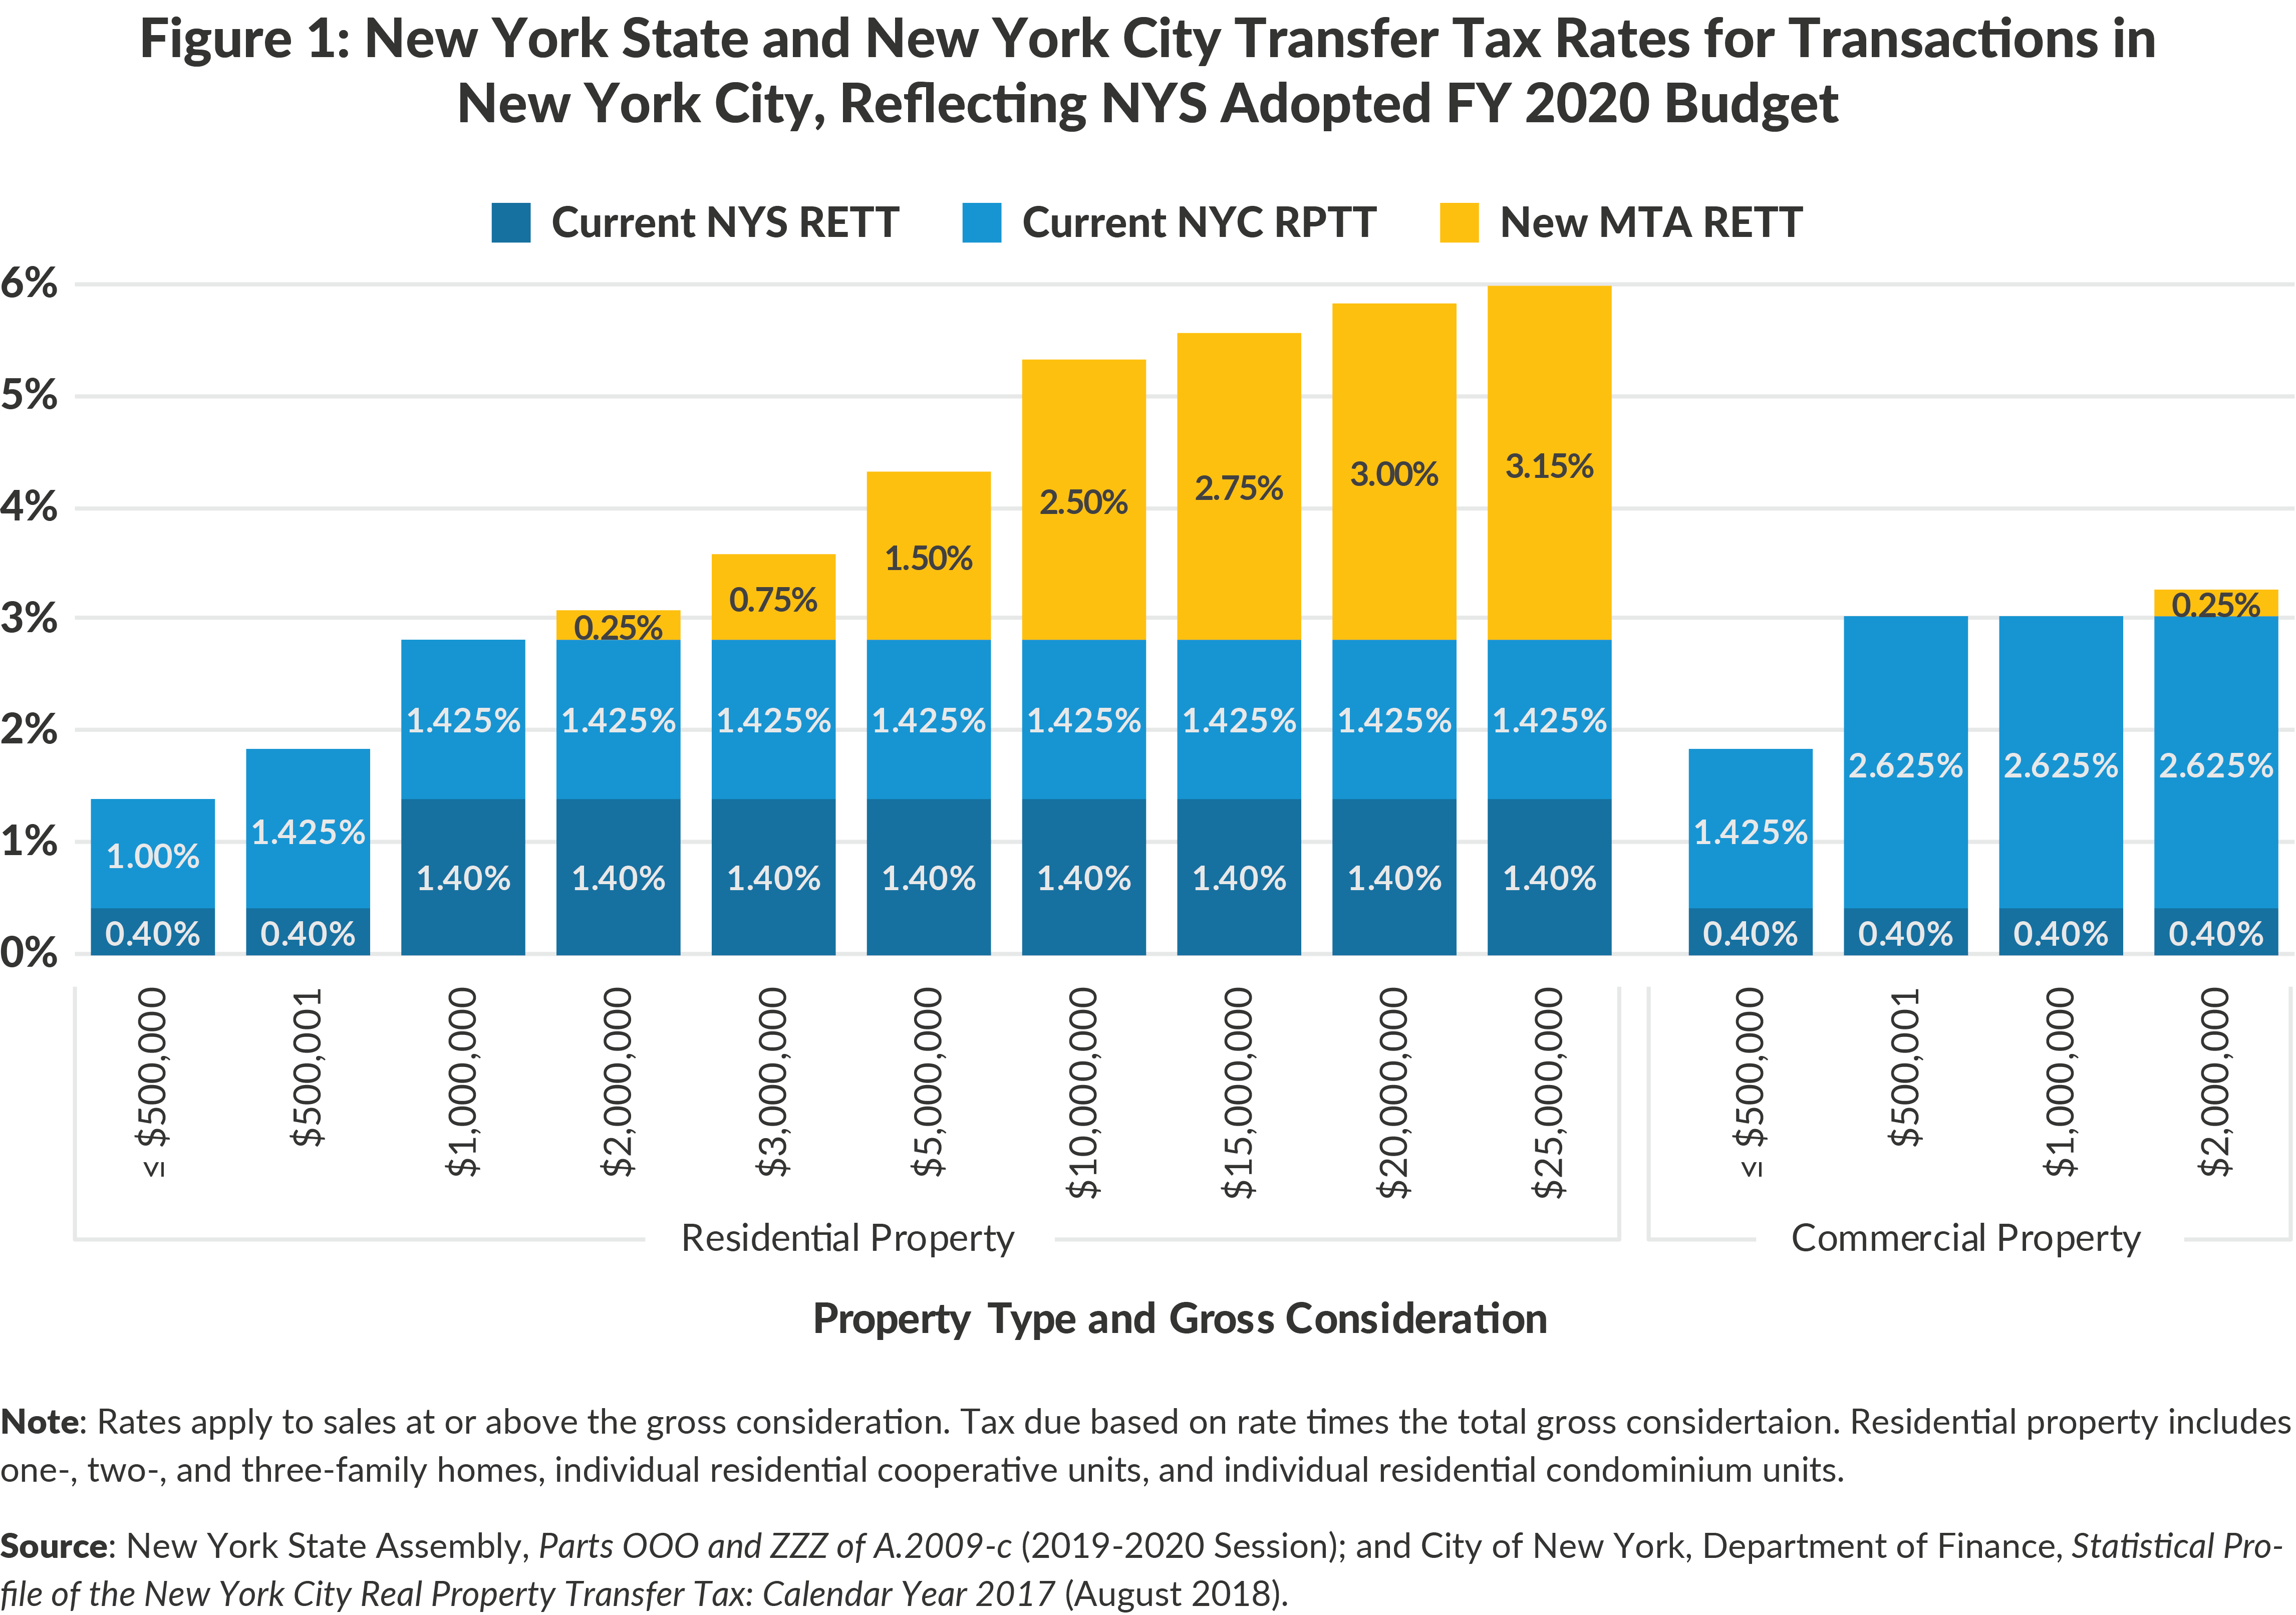 nyc-property-tax-rate-2020-change-comin